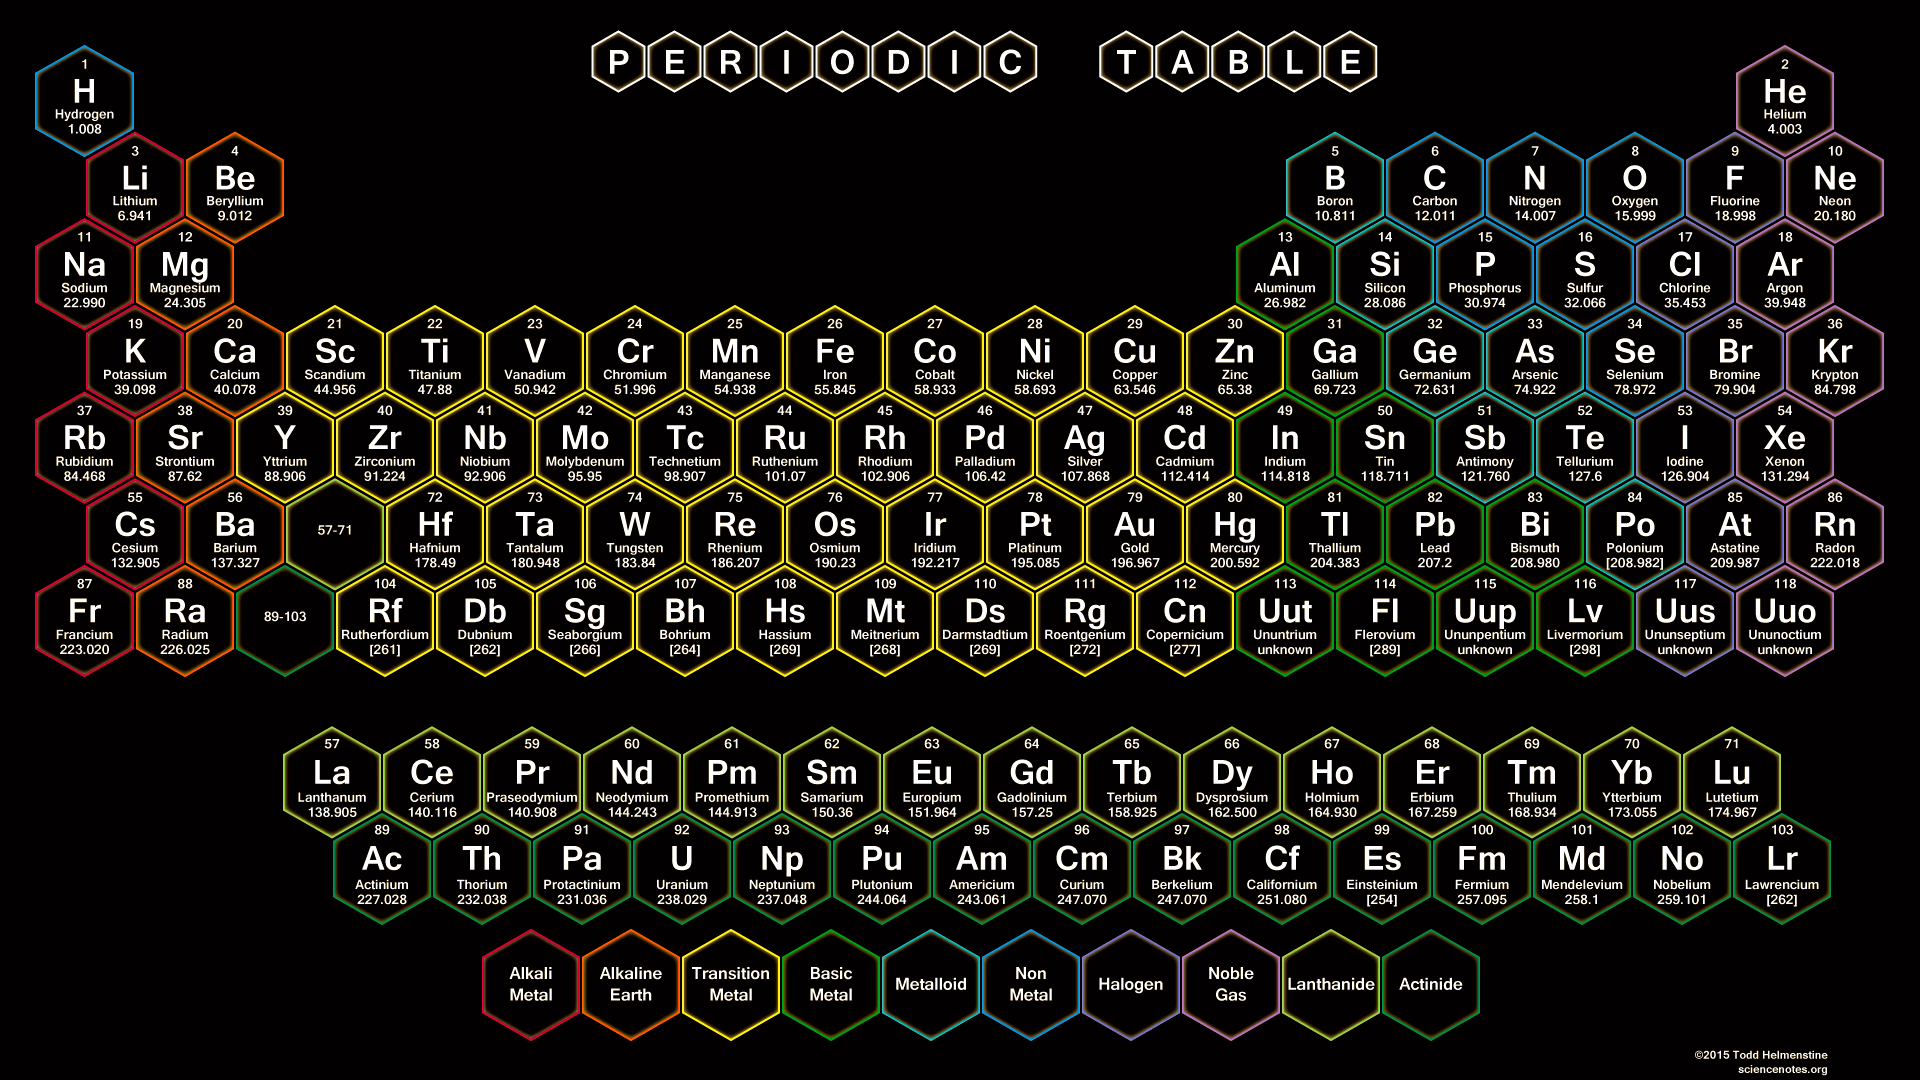 Periodic Table CE - Cemetech | Forum | Your Projects [Topic]